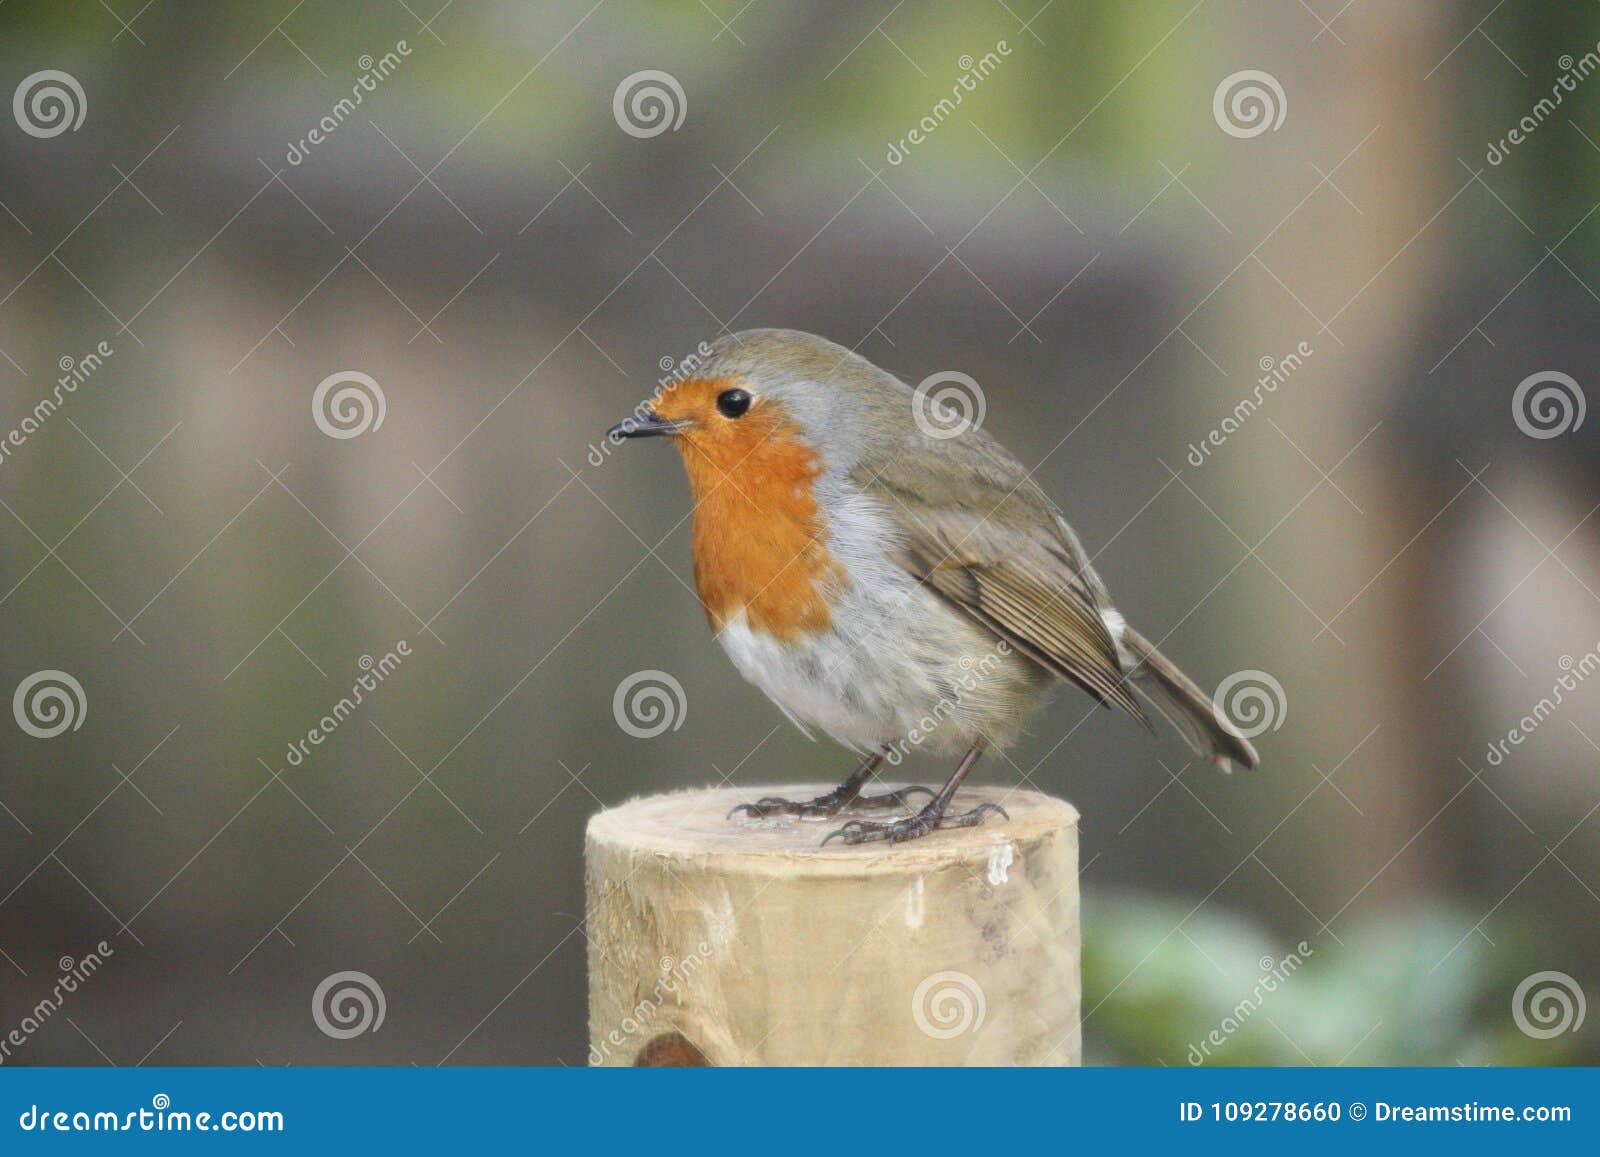 robin redbreast on a post - unmoved